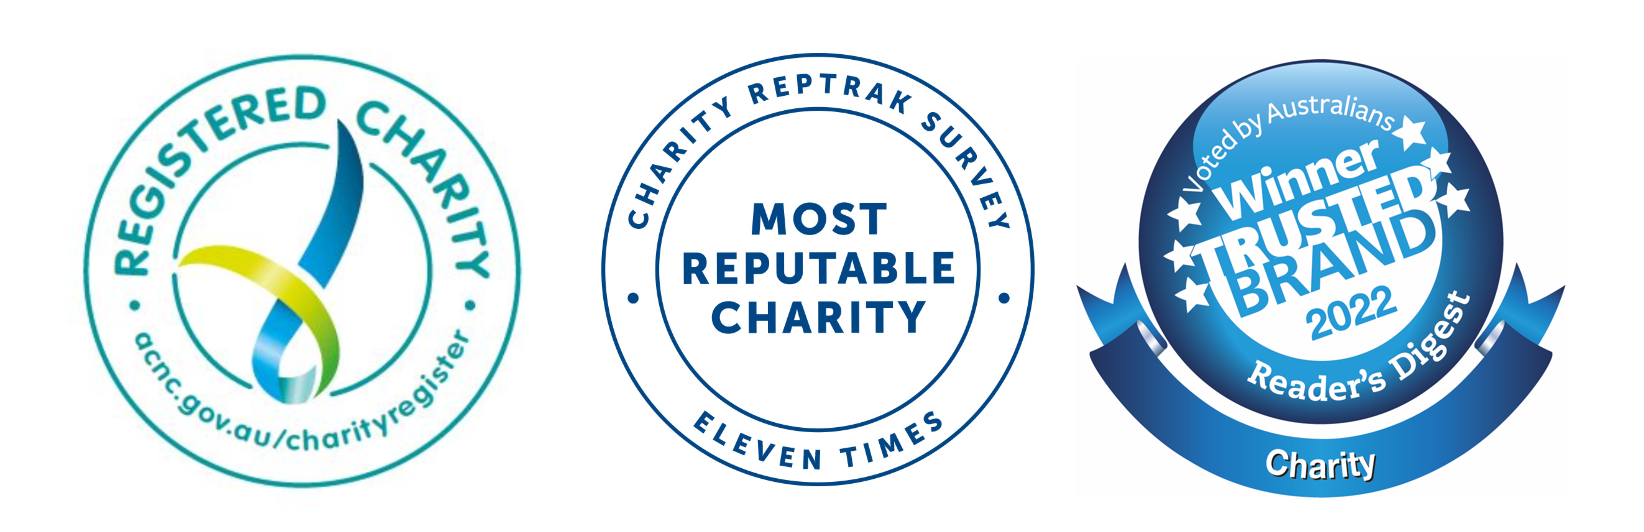 ACNC registered charity, Nine Times most reputable charity, and Readers Digest 2021 trusted brand winner.